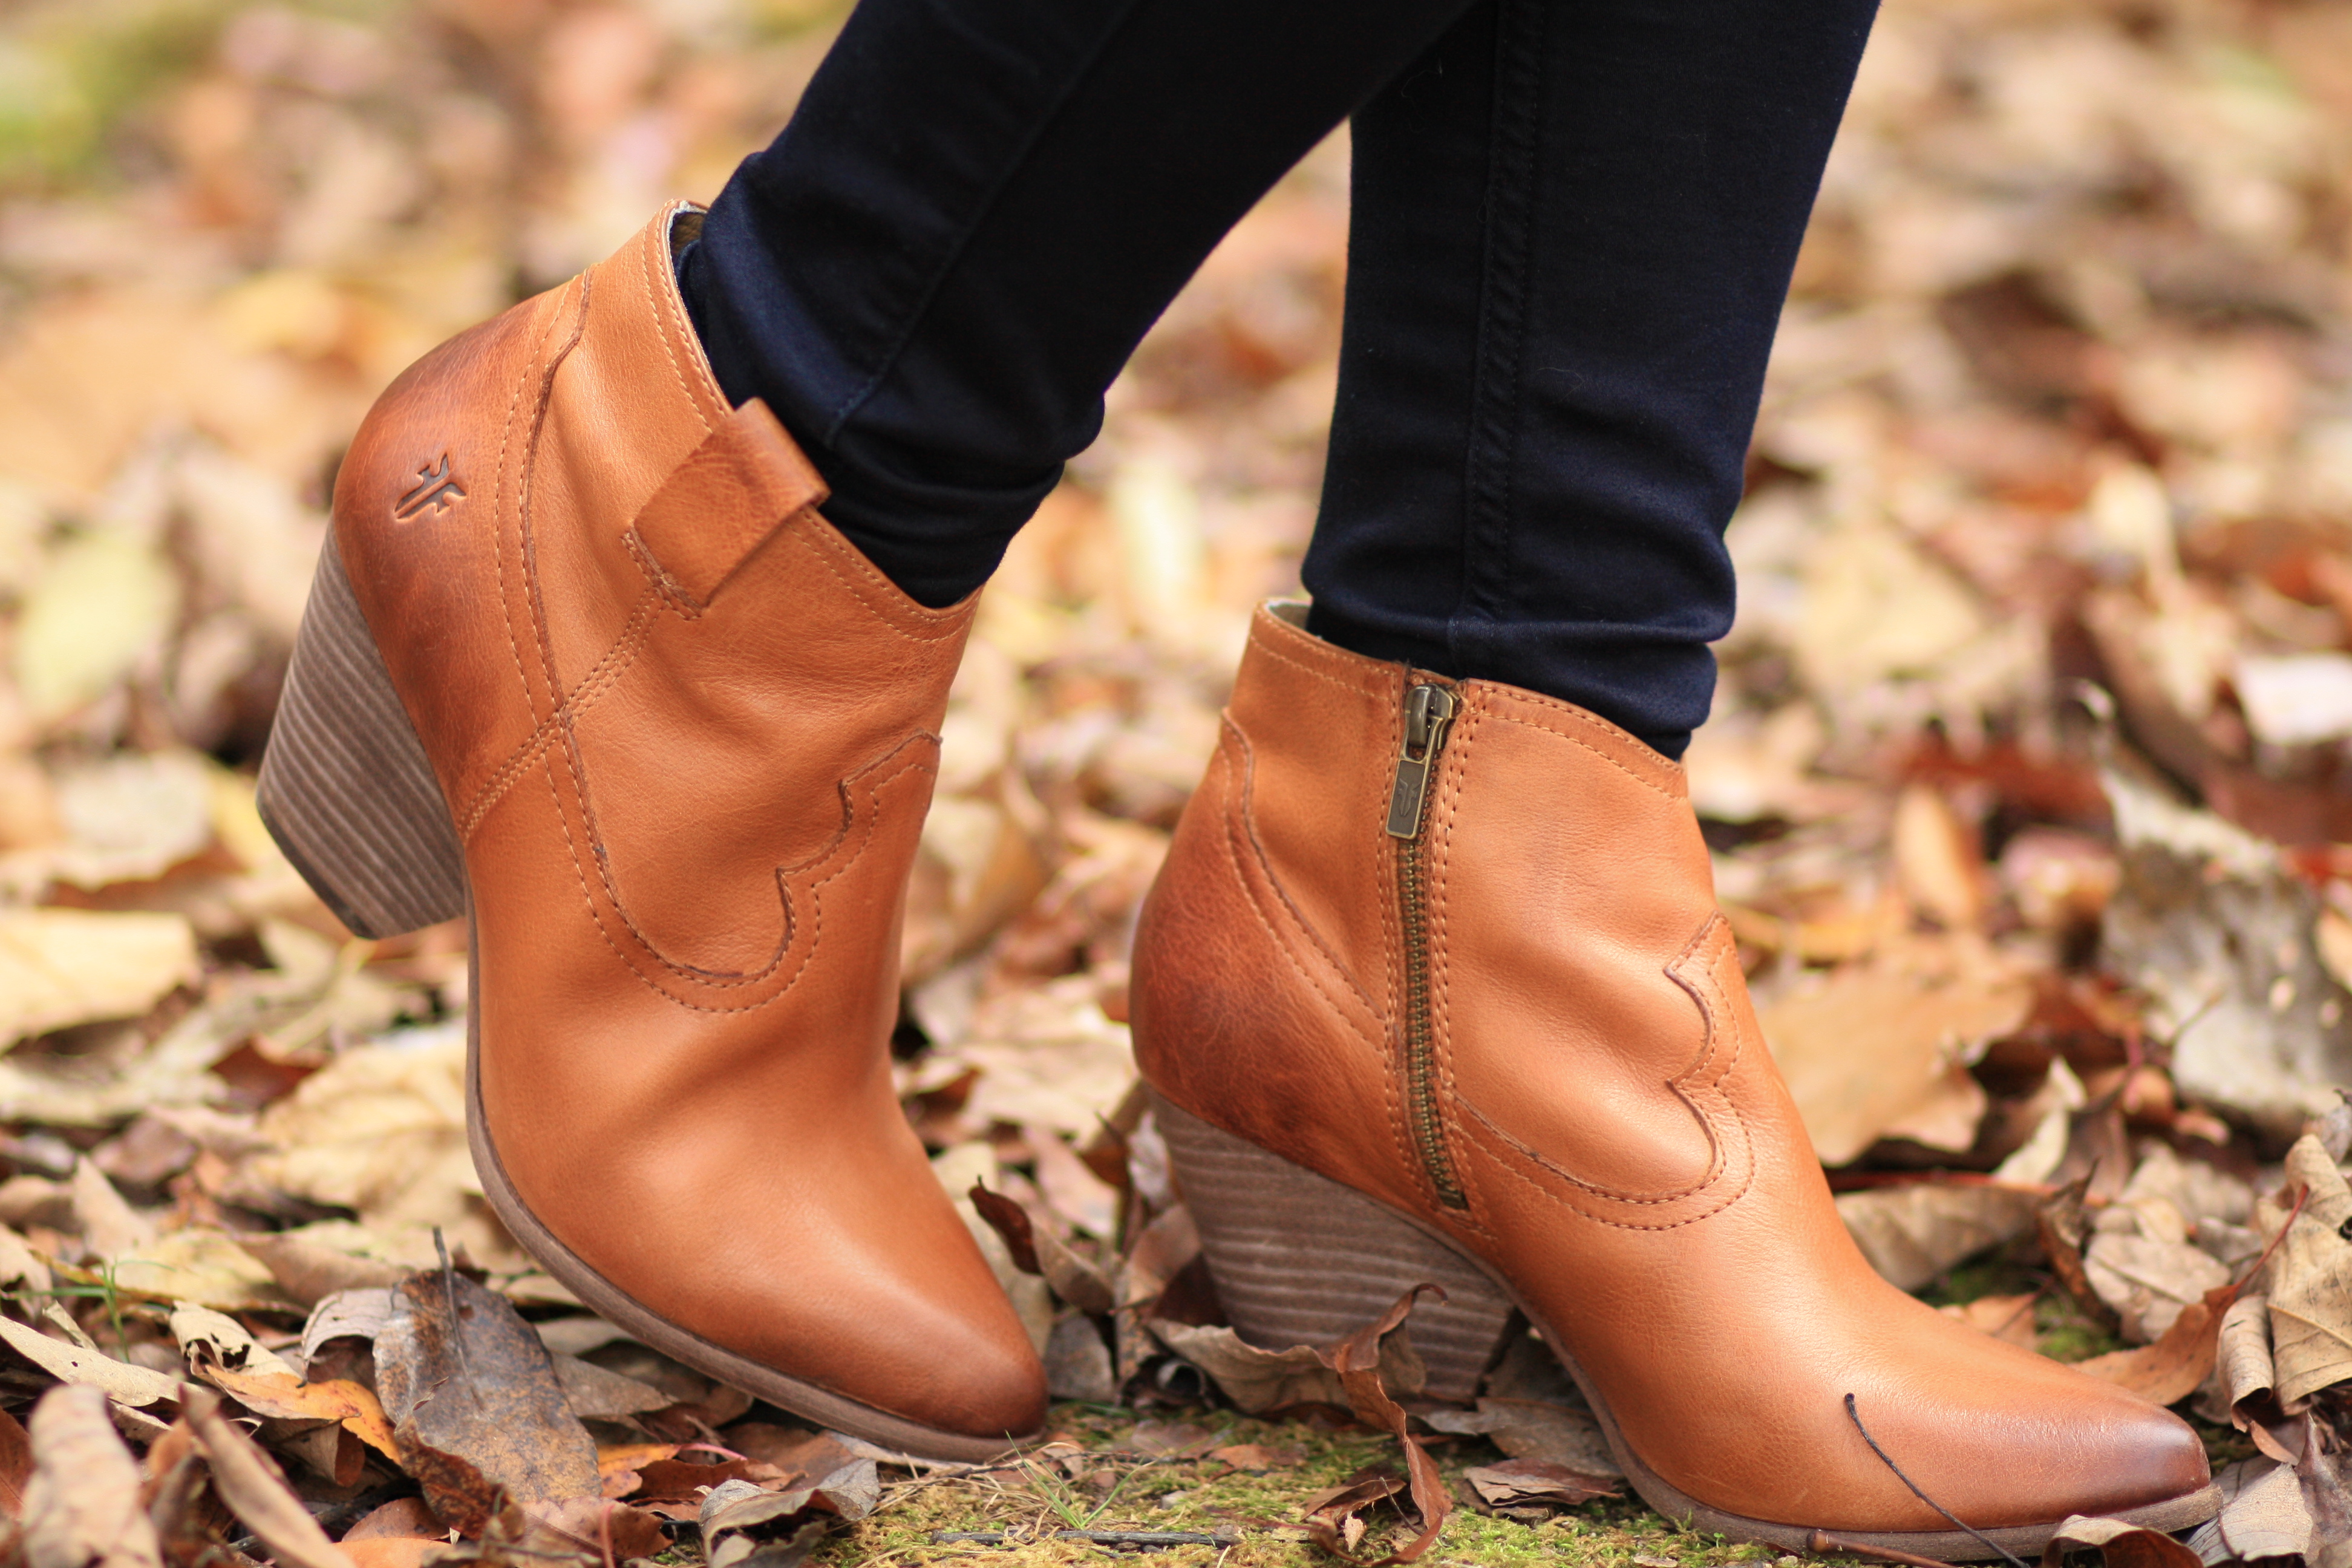 tan leather booties